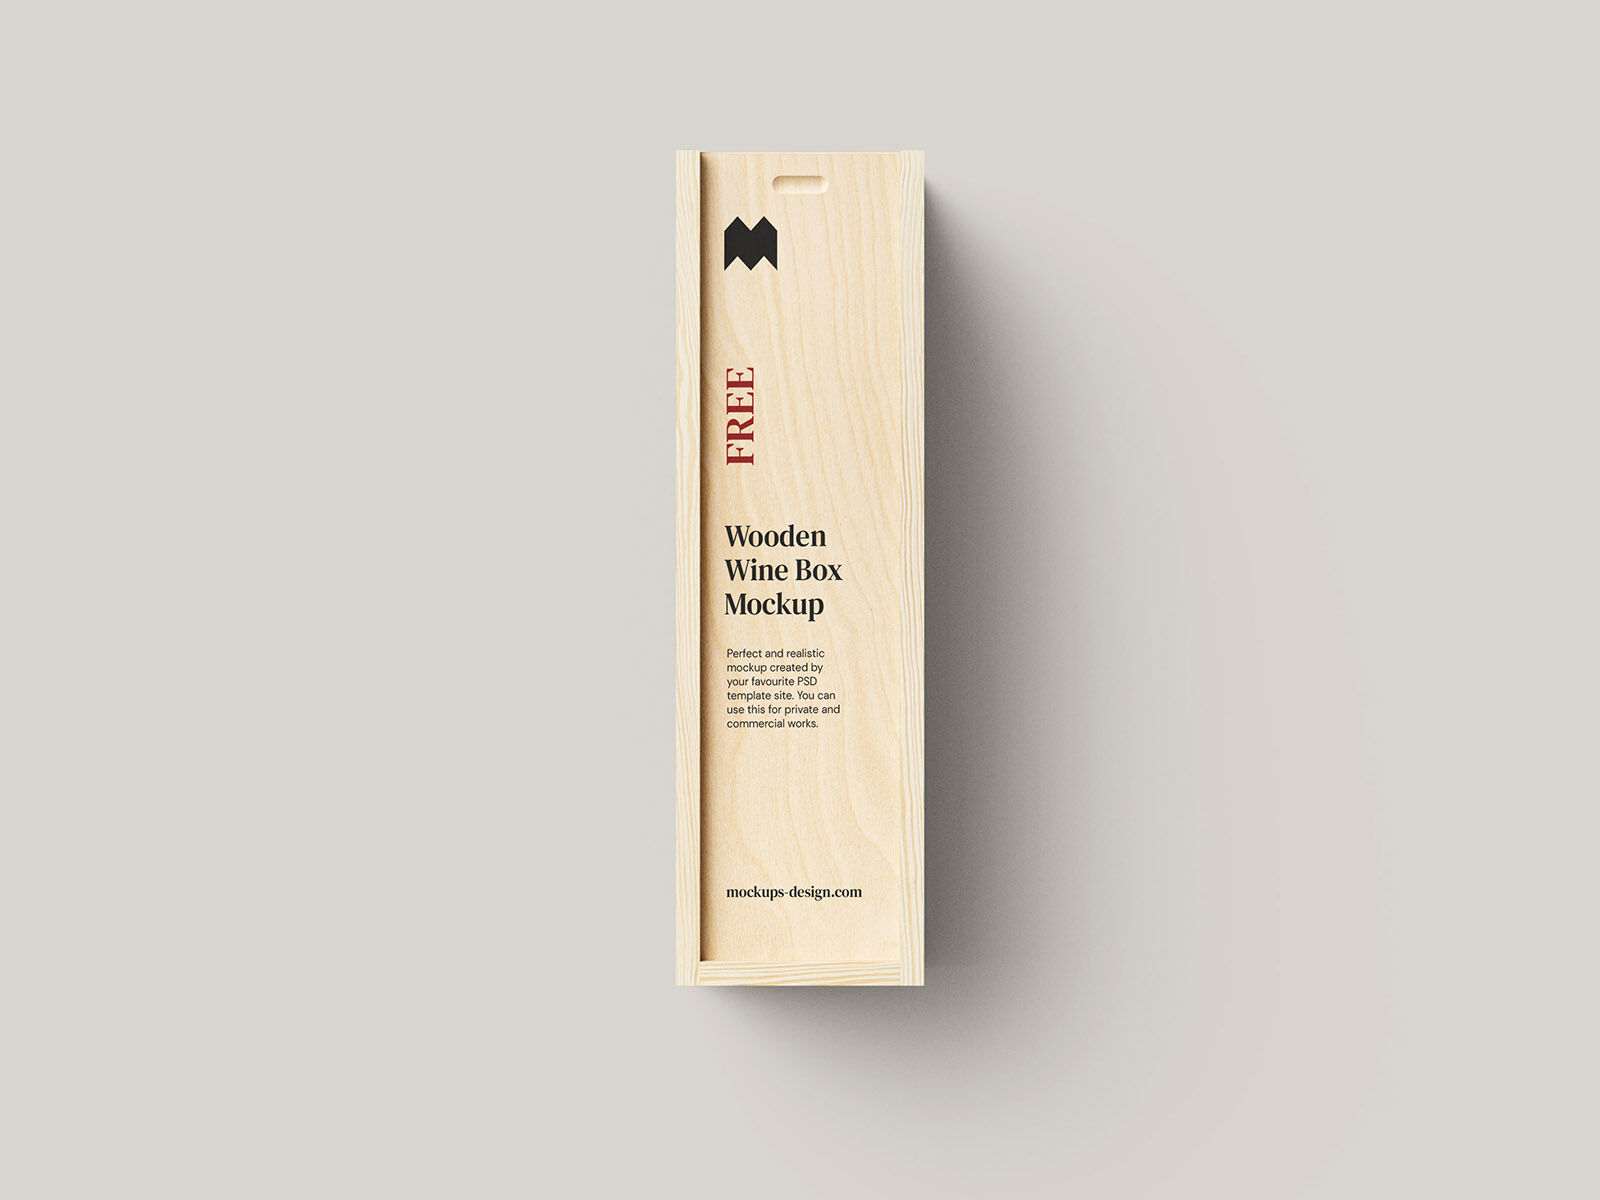 4 Mockups of Wooden Wine Box in Different Views FREE PSD